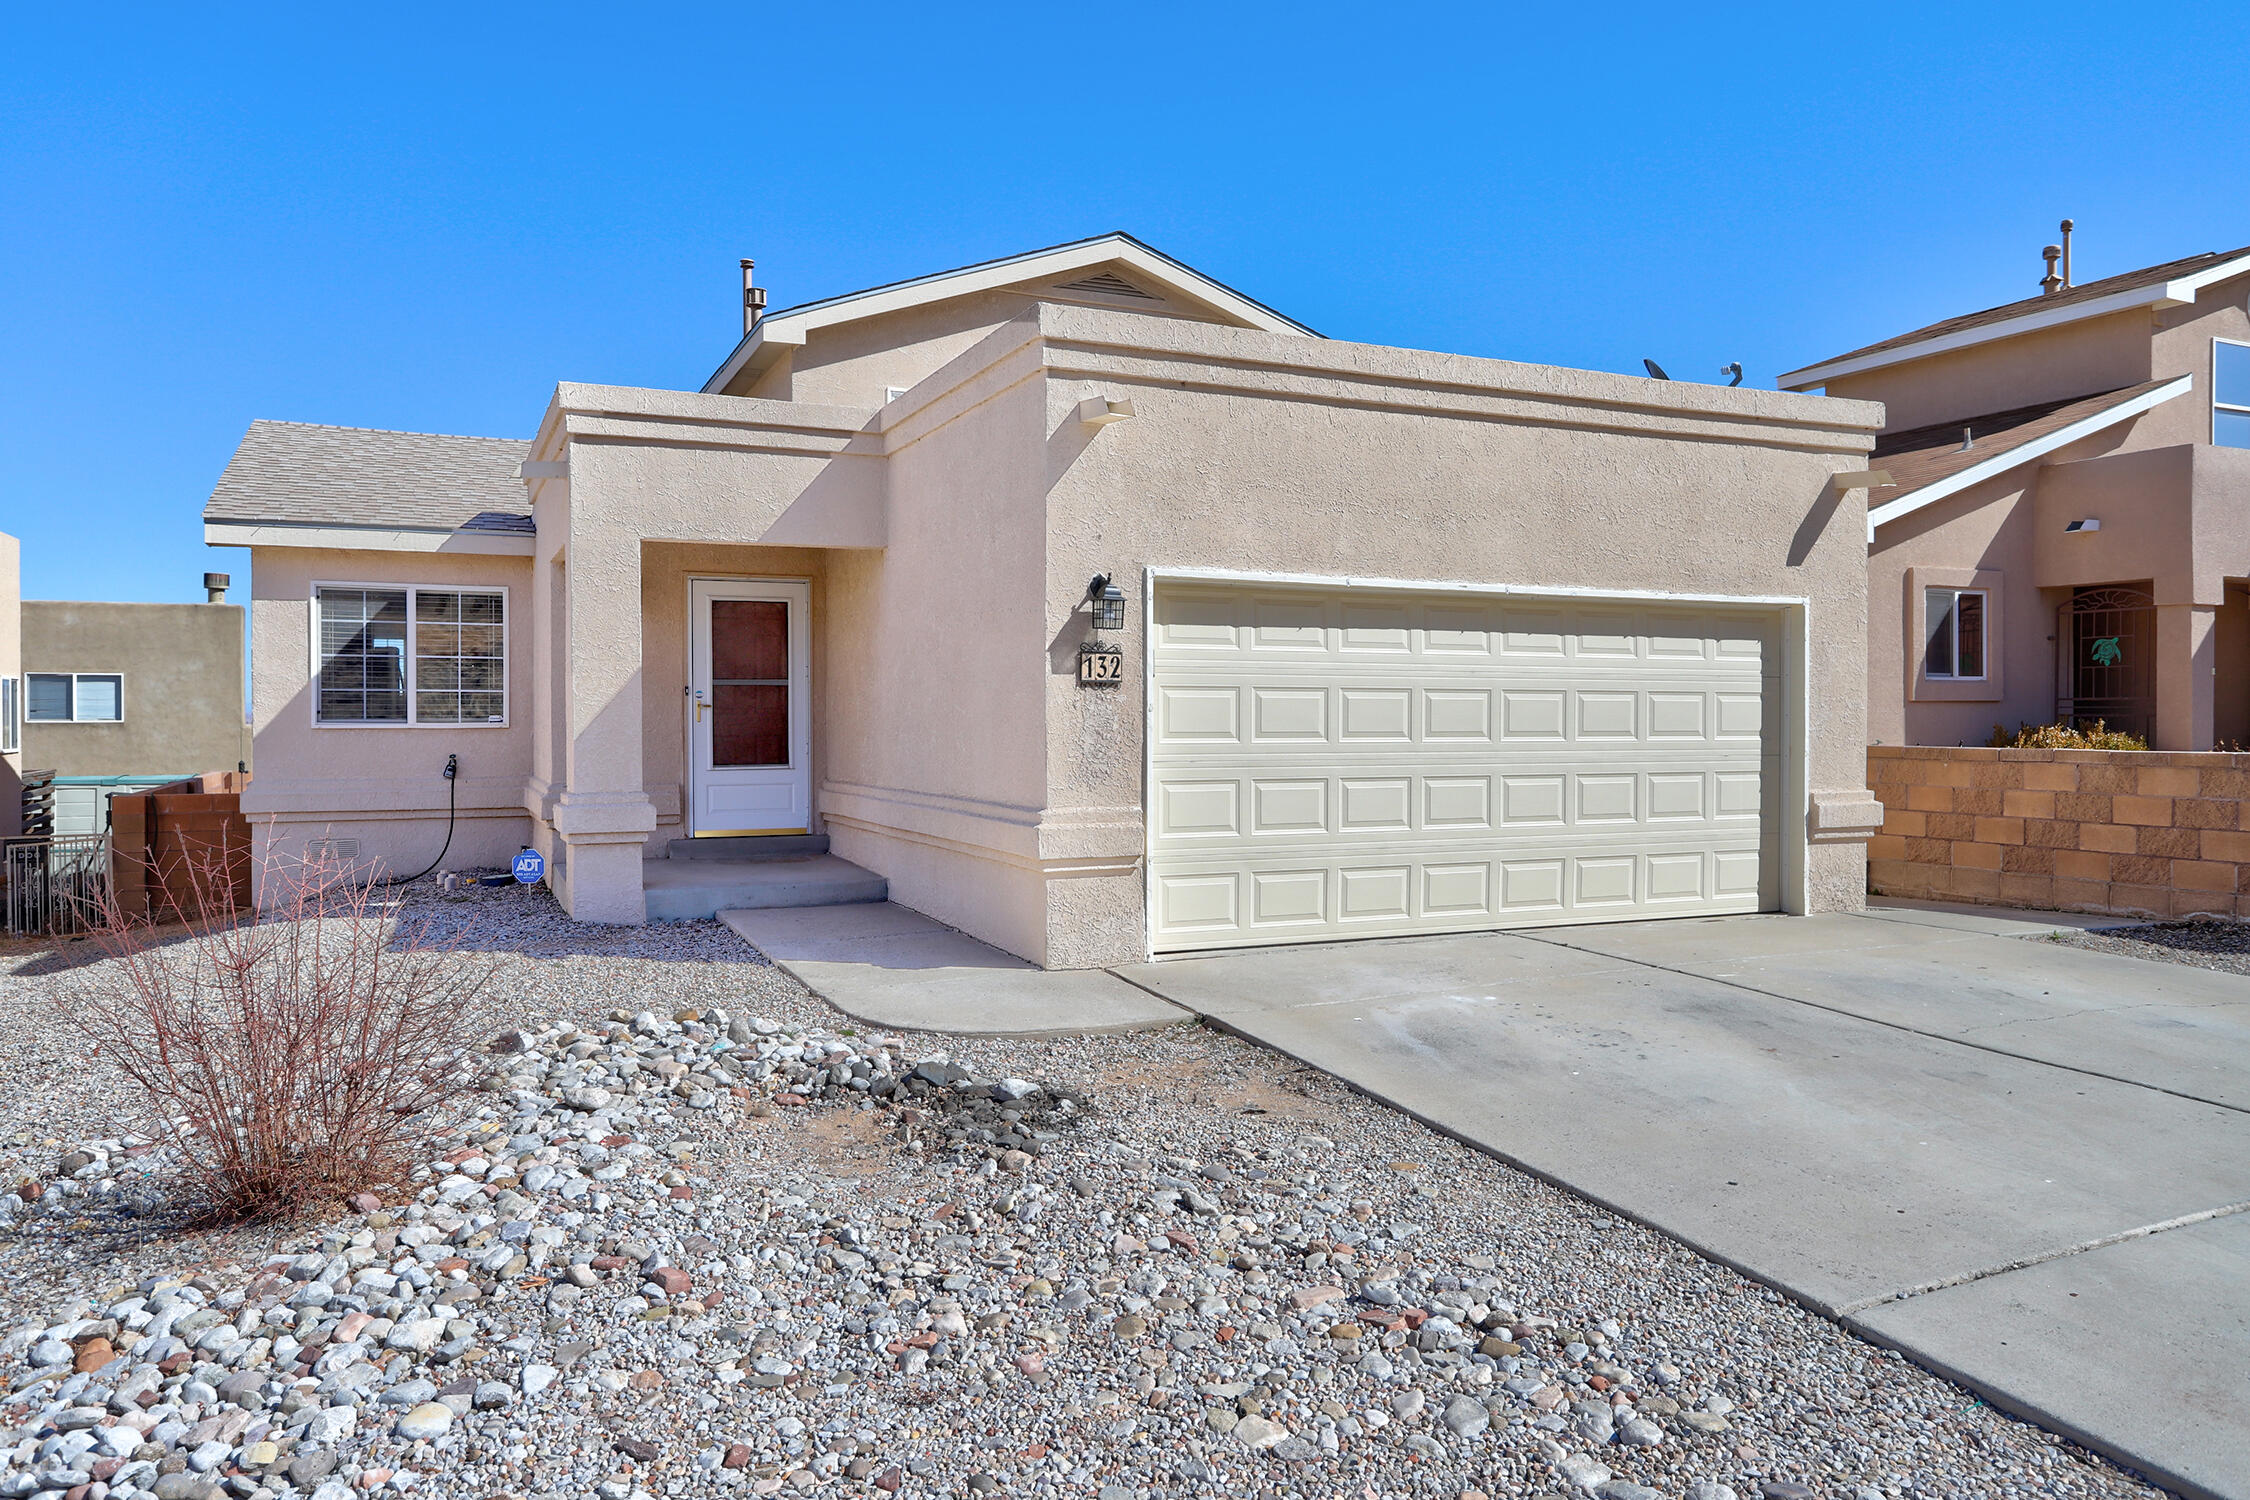 This inviting freshly painted 4 bedroom, 2-1/2 bath tri-level residence home in the heart of Rio Rancho is waiting for you! This cozy retreat offers plenty of space perfect for entertaining or unwinding after a long day. Washer, dryer, & refrigerator are included for added convenience. In the summers enjoy the comfort of refrigerated air throughout. Outside, enjoy your private backyard with easy-care turf. Situated near an array of amenities such as shopping, dining, entertainment and more, this home offers the ideal blend of convenience and leisure. For commuting, easy access to Santa Fe & Los Alamos. Plus, benefit from being within the highly desired Rio Rancho Schools District This one is a gem, don't miss out!